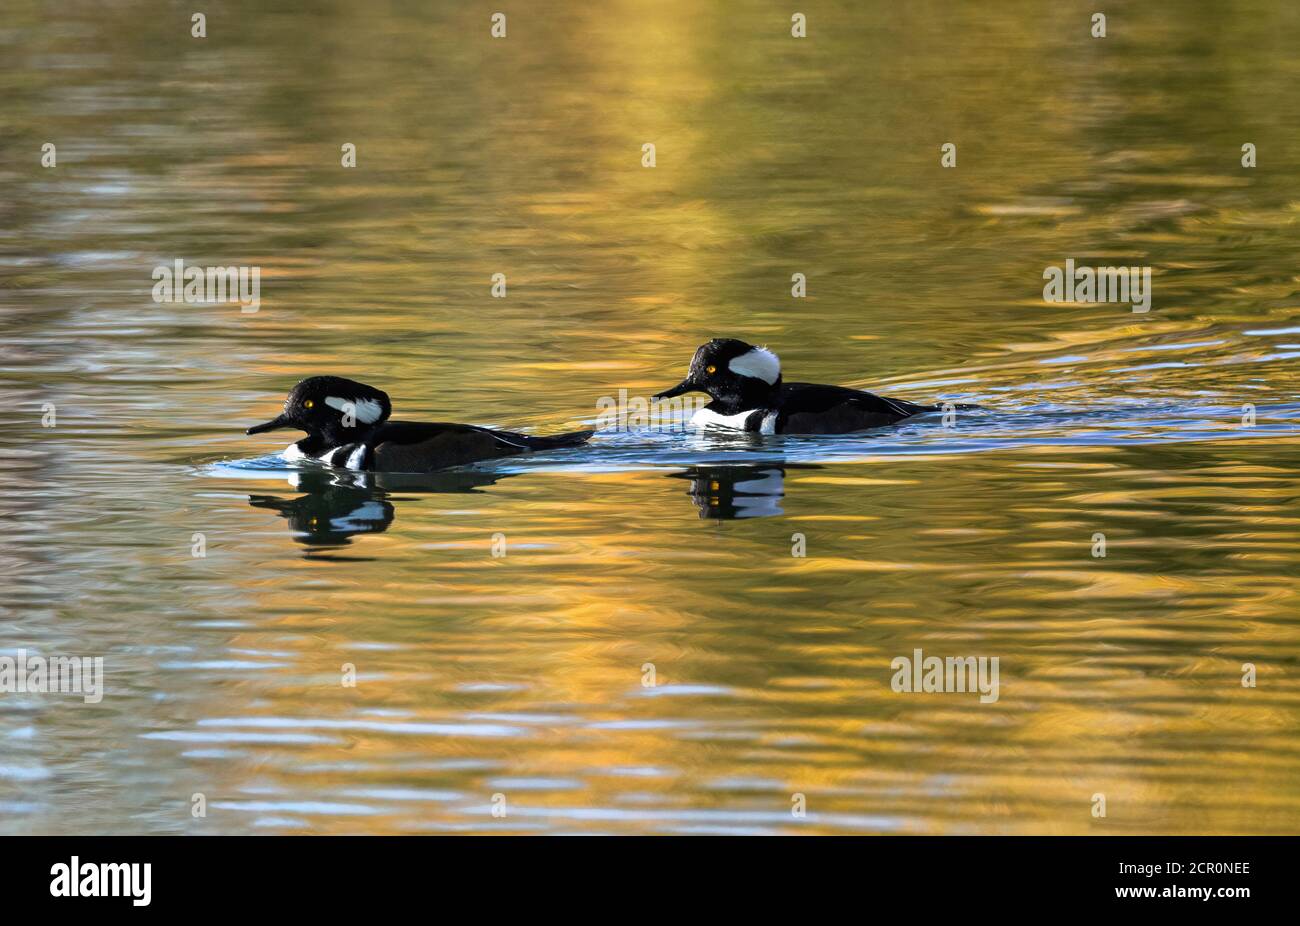 Two Hooded Merganser drakes with a glint of light in their eye, are a pretty silhouette in this golden lake illuminated by the setting sun. Stock Photo